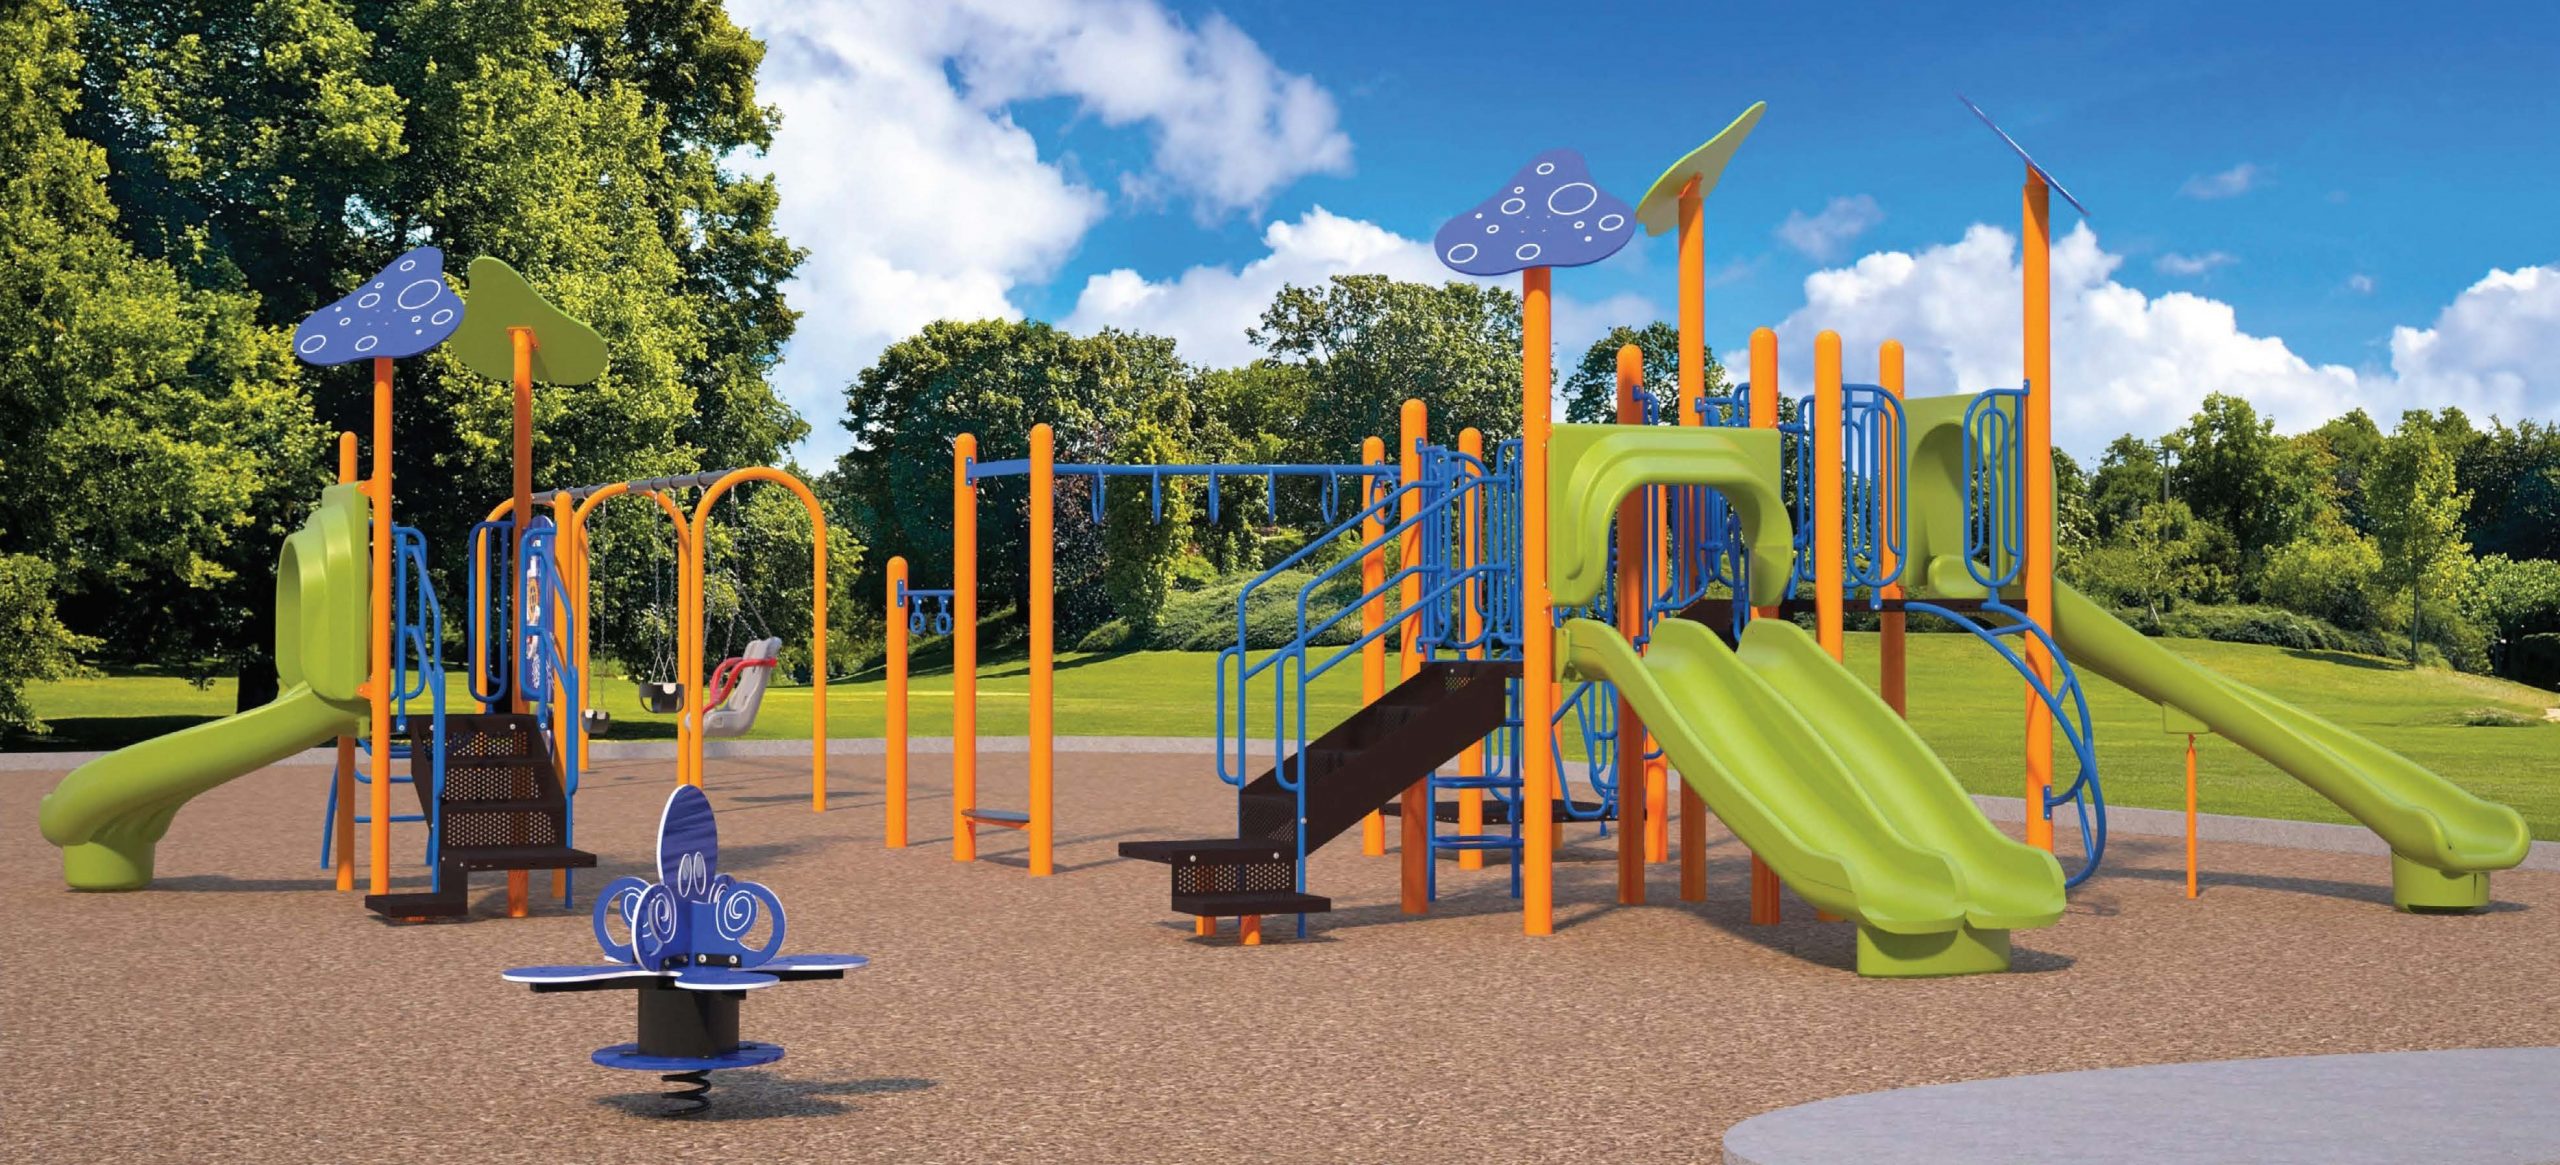 Playground Design B for the Dunlop Park Playground improvements, with features as described below.